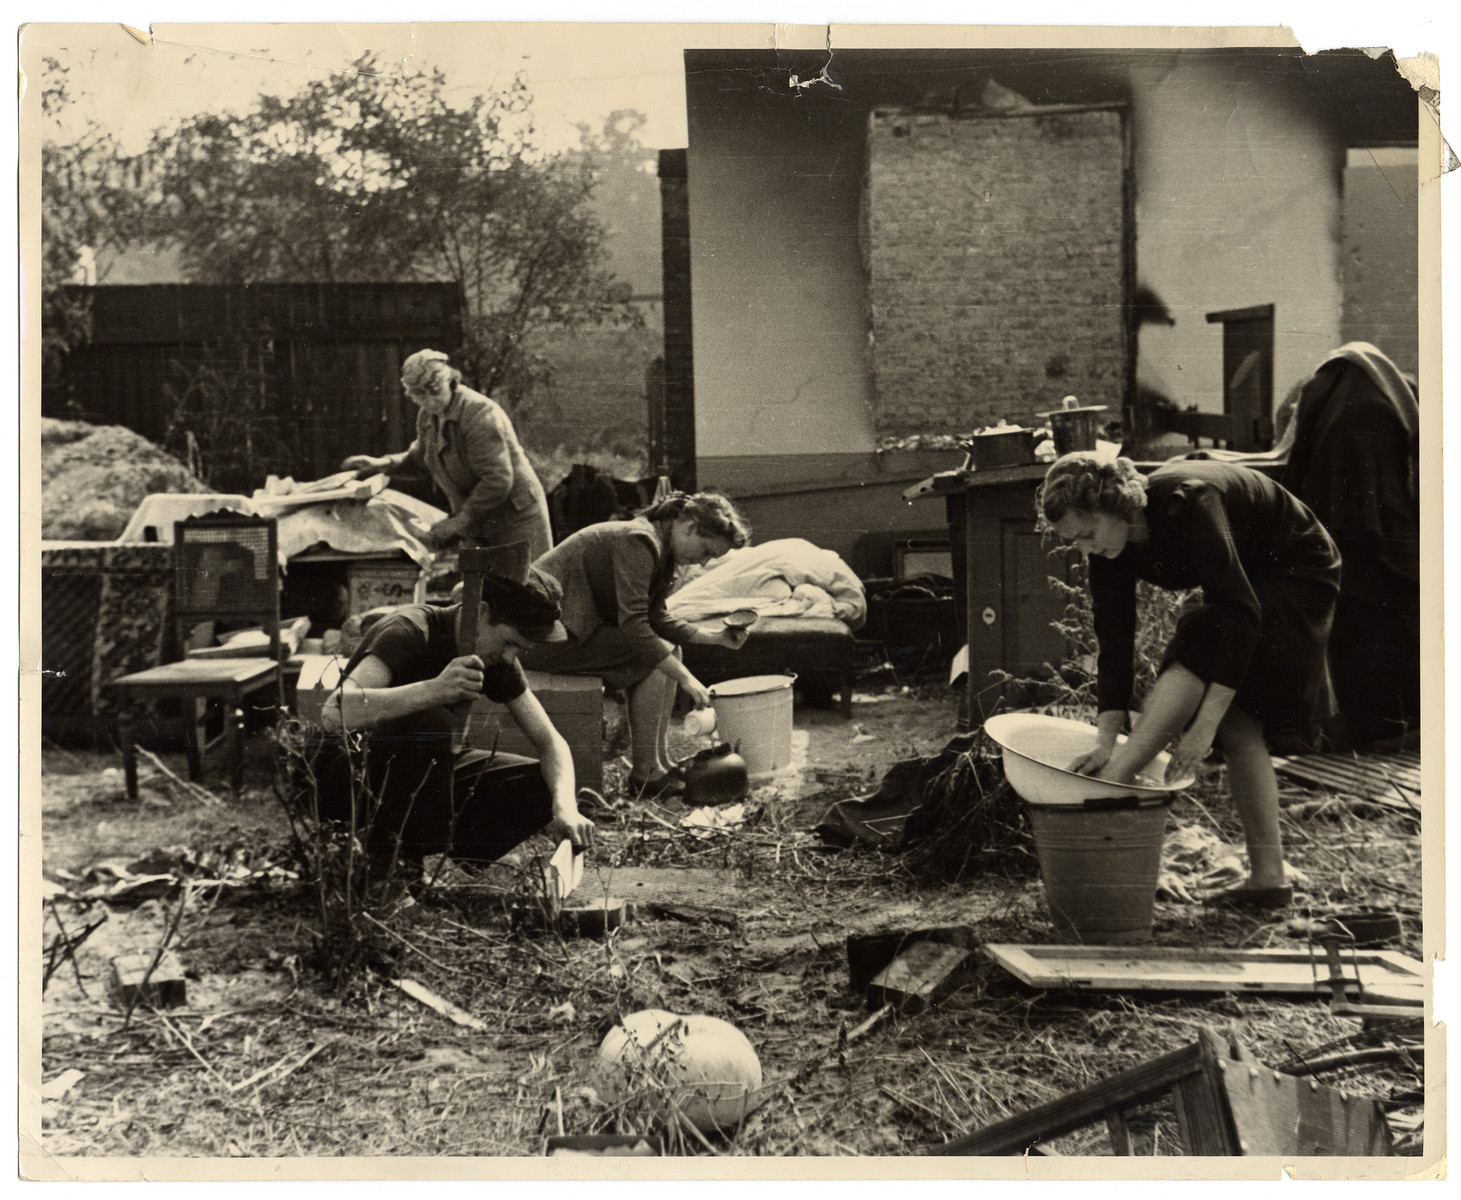 A Polish family performs their daily chores amidst the remnants of their household furnishings that they have reassembled outside the charred ruins of their home in Warsaw.